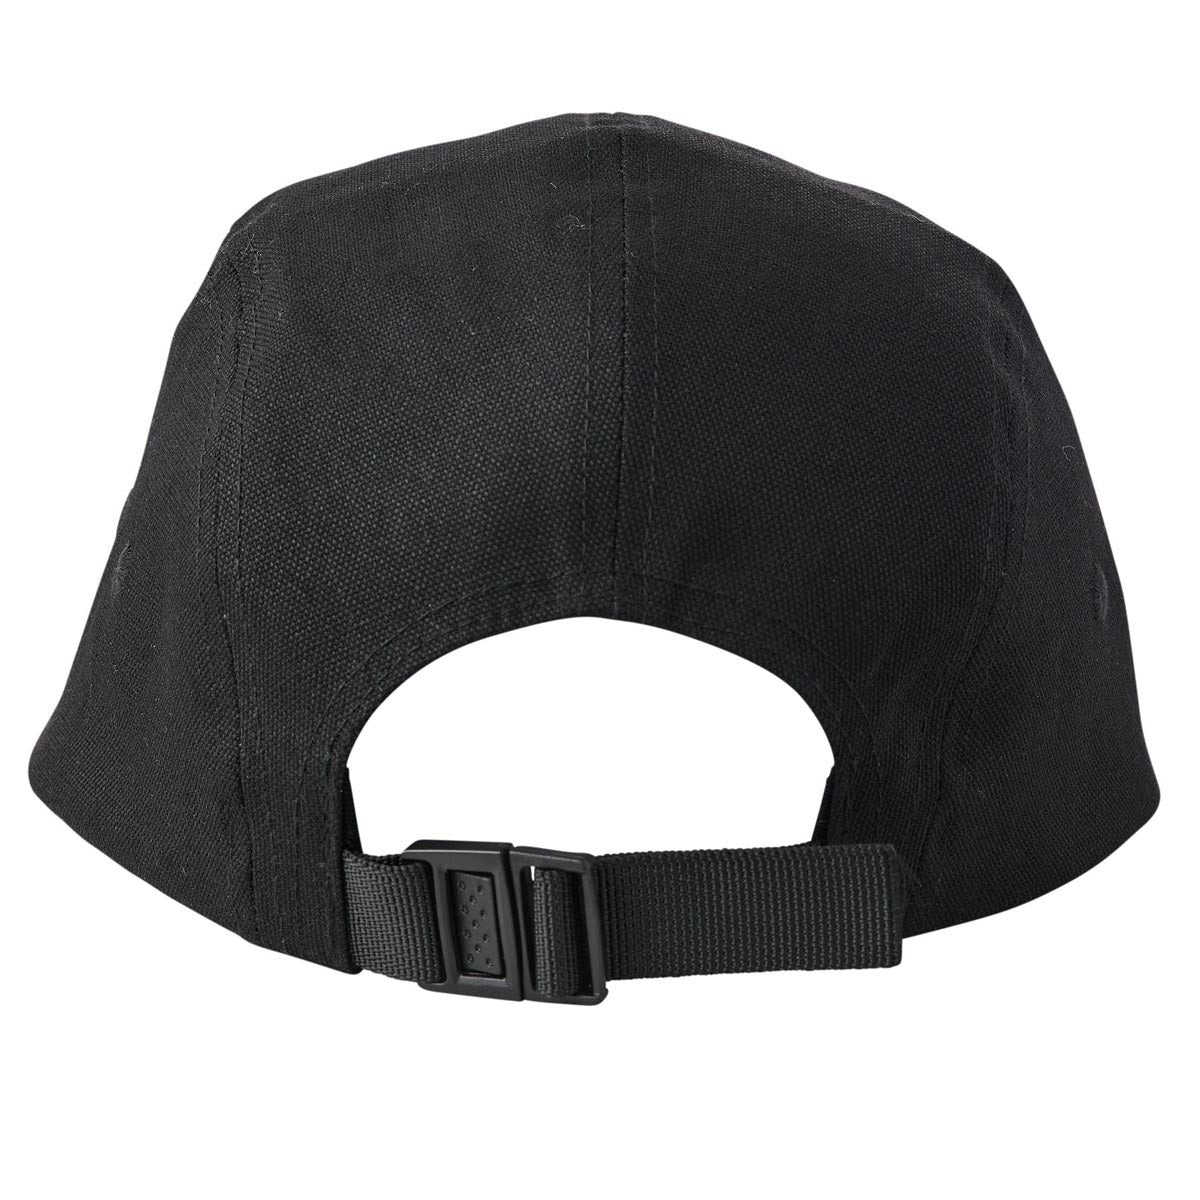 Independent Summit Scroll Camp Unstructured Hat - Black image 2